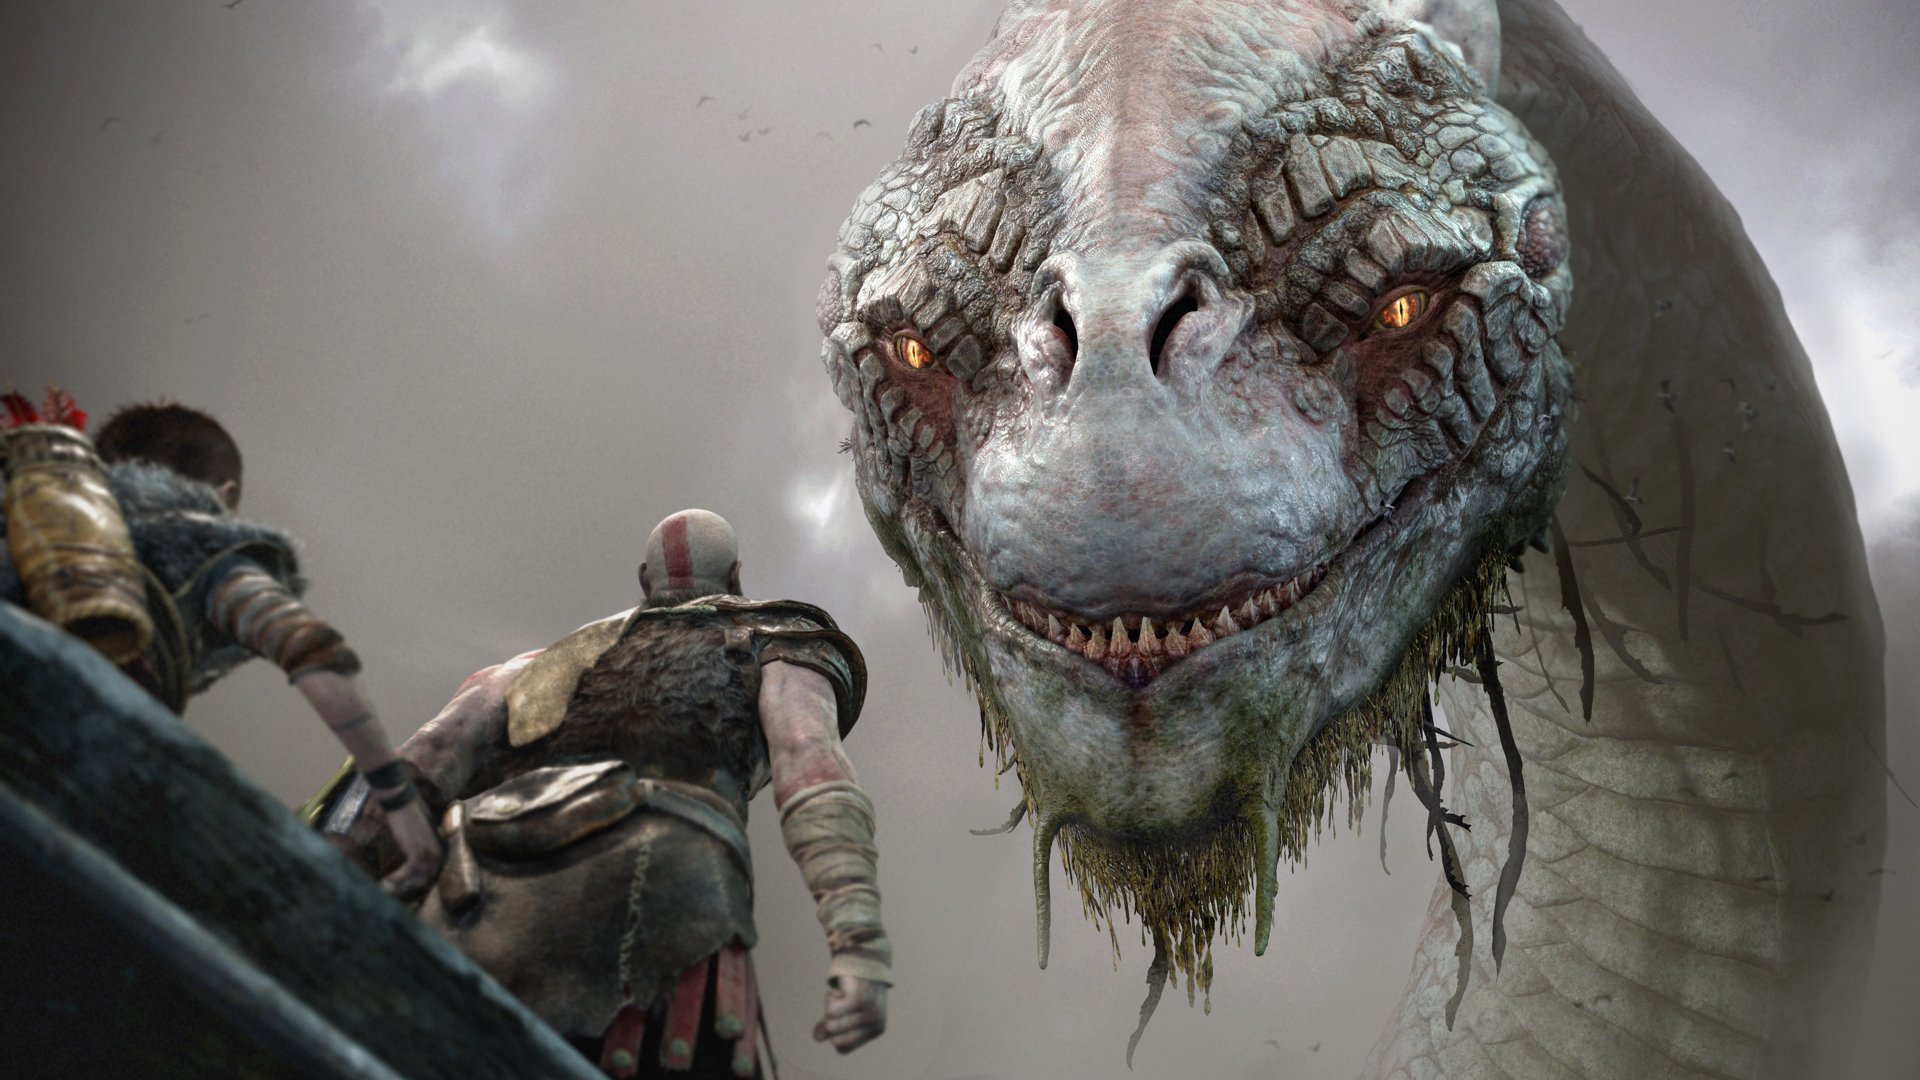 Check out our preview of God of War, watch gameplay footage and check out what we learned from writer/director Cory Barlog